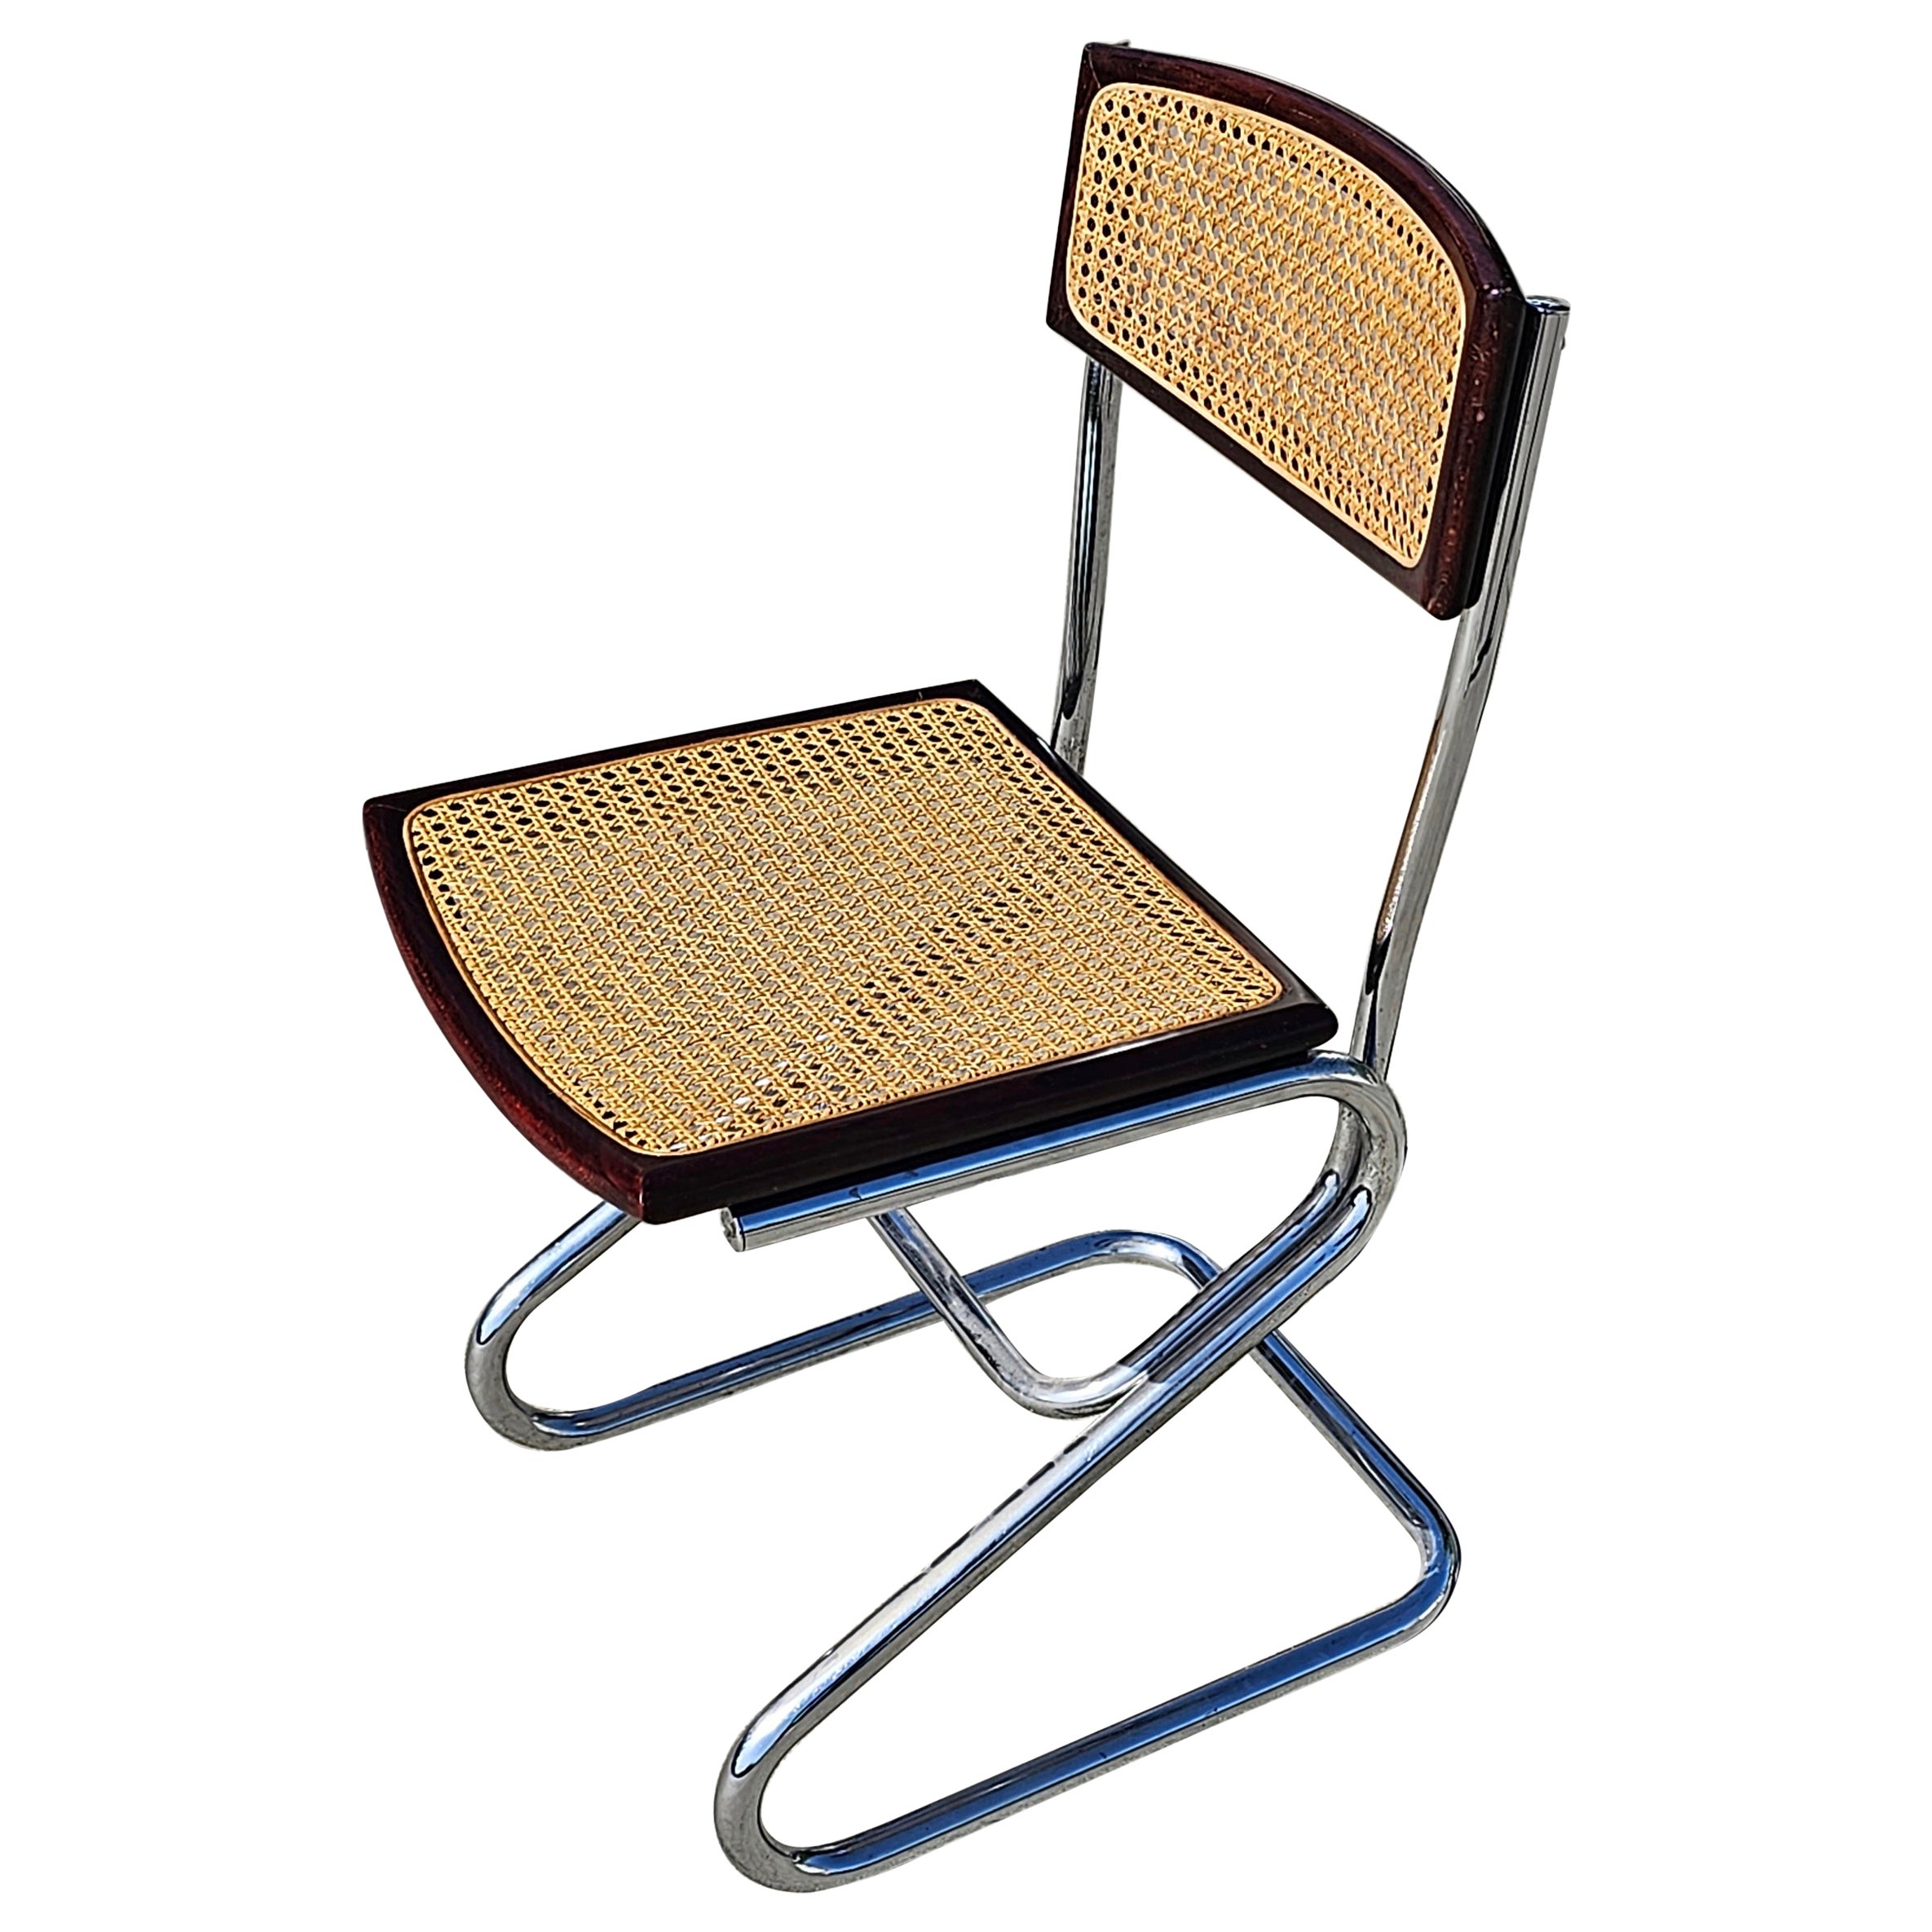 1 of 2 Bauhaus Style Tubular Dining Chairs with Cane Seats, Italy 1970s For Sale